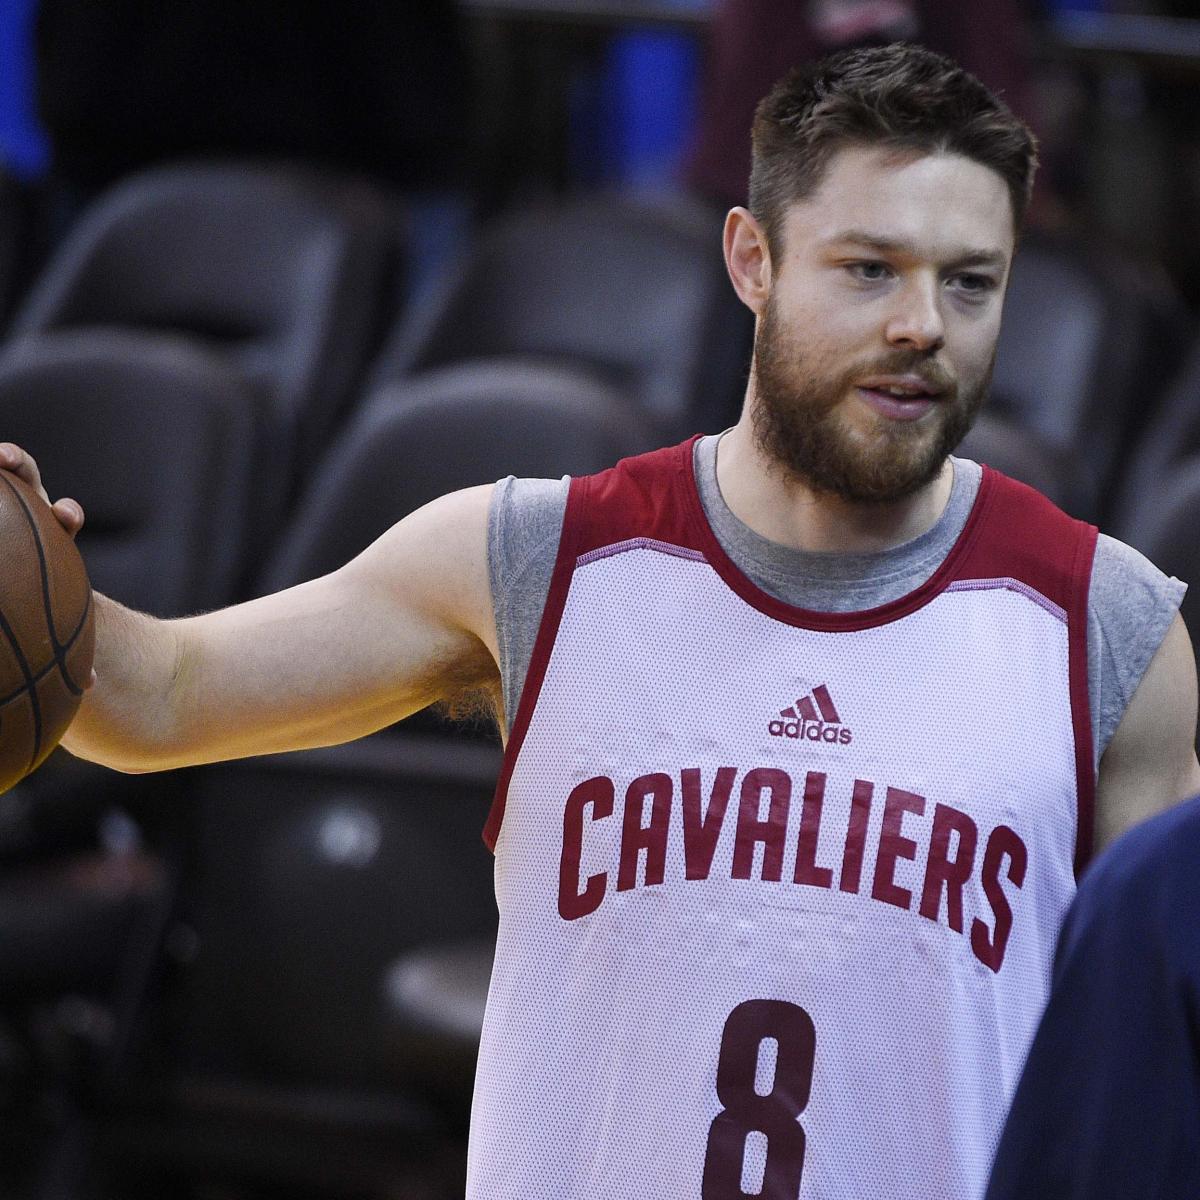 Cleveland Cavaliers Bus Leaves Without Matthew Dellavedova After Game 1 Loss ...